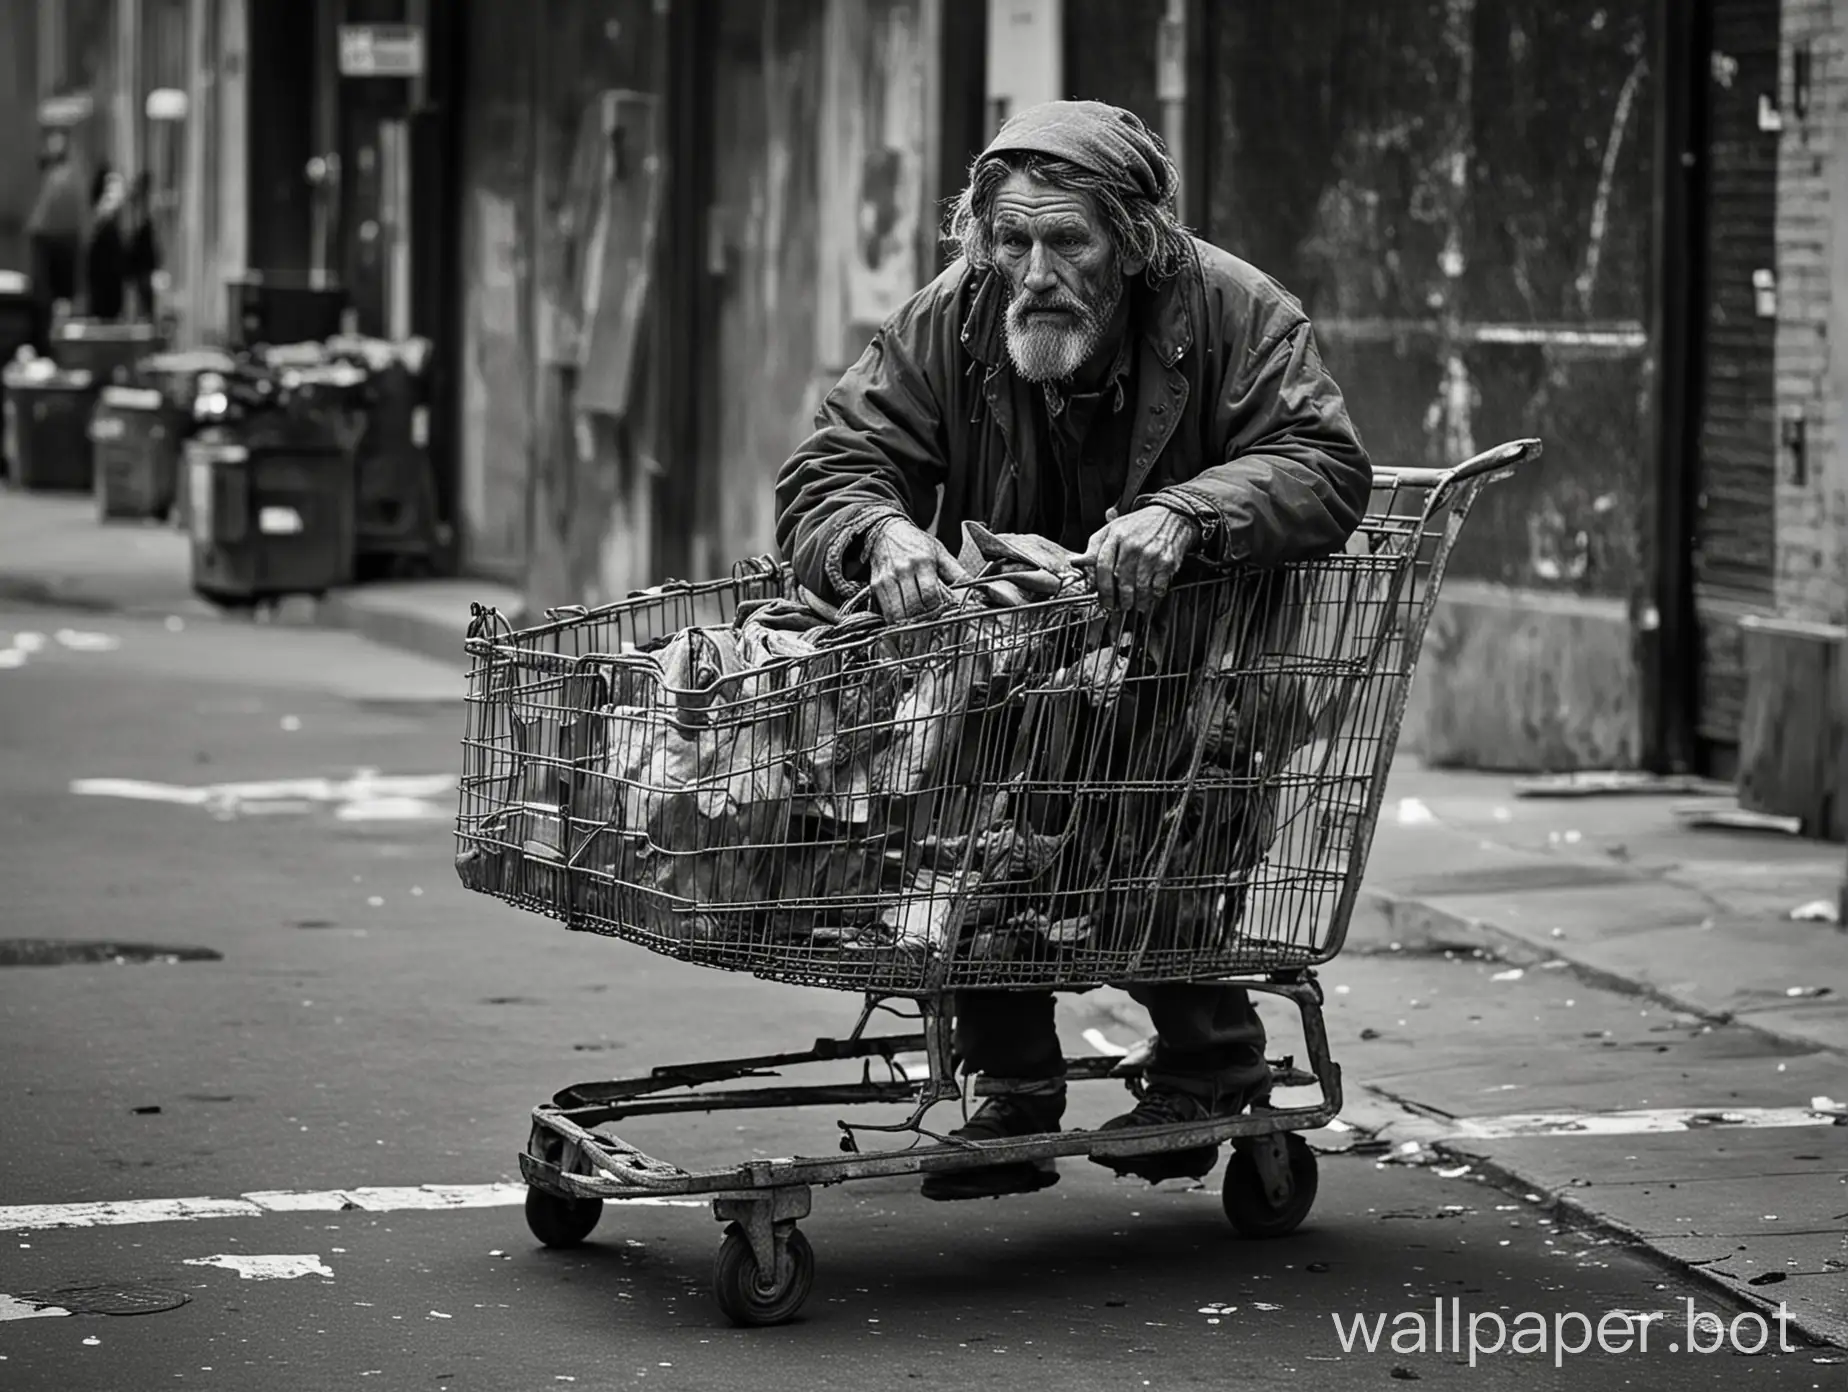 A bedraggled homeless person in the streets of New York City wheeling his limited belongings in a battered old shopping cart. He exudes a feeling of hopelessness.